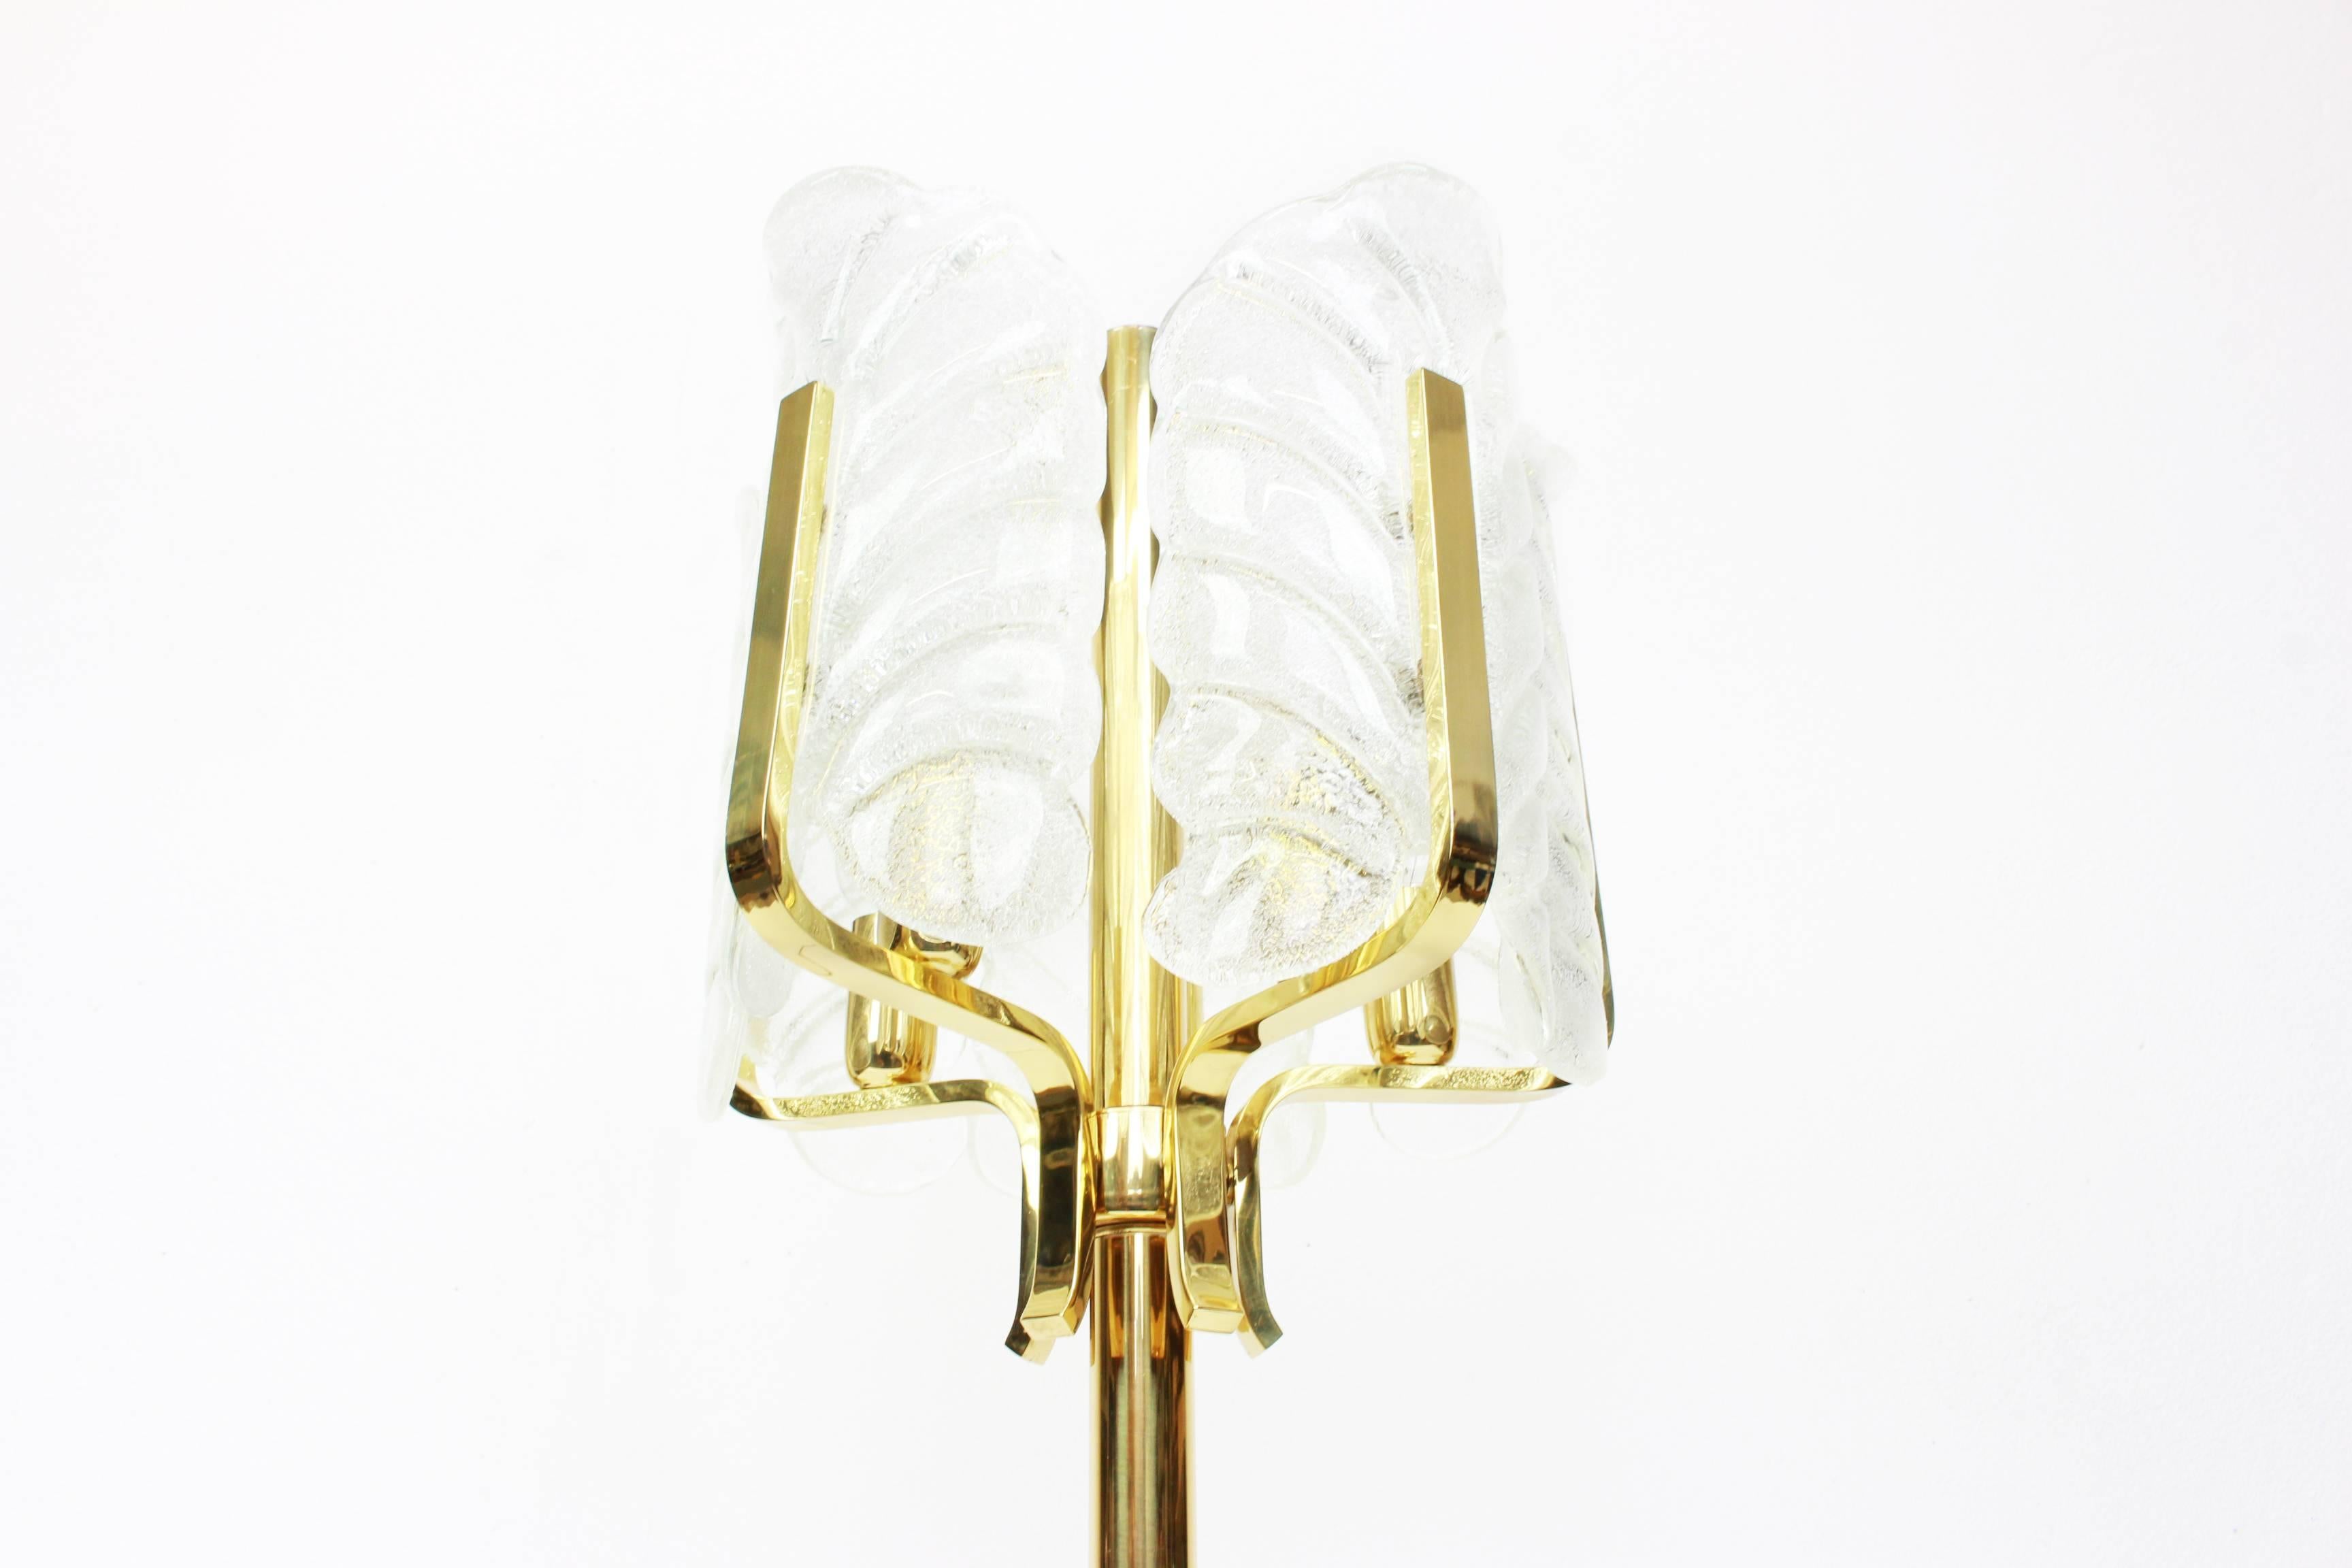 Very glamorous table lamp designed by Carl Fagerlund for Orrefors, Sweden, manufactured in midcentury, circa 1960-1969.
The light features a polished brass frame with five stunning Murano glass leaves which have a matte frosted relief on the inside